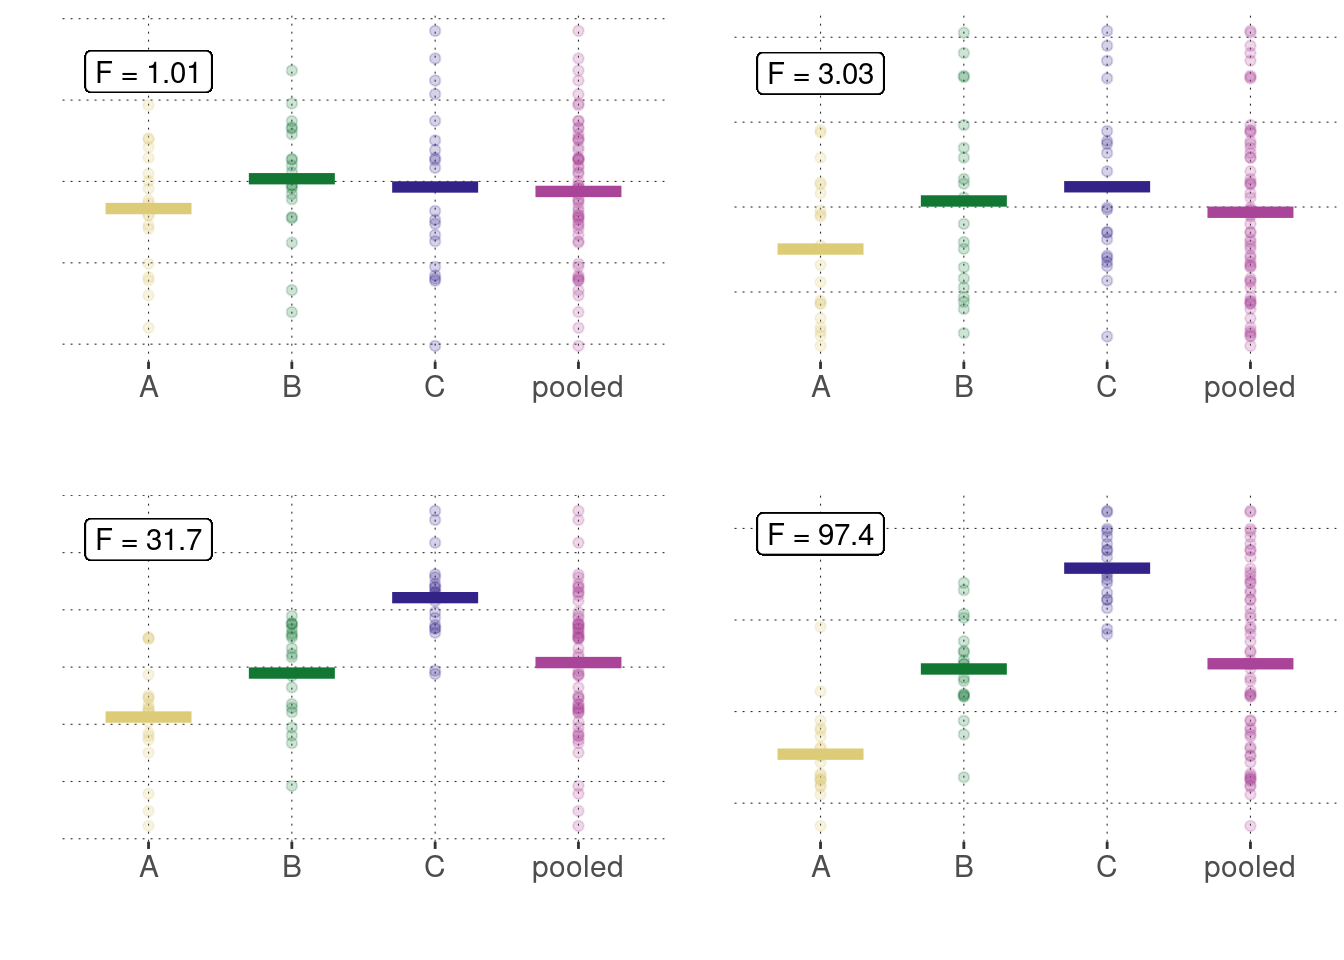 Different examples of metric measurements for three groups (A, B, C), shown here together with a plot of the combined (= pooled) data. We see that, as the means of measurements go apart, so does the ratio of between-group variance and within-group variance.